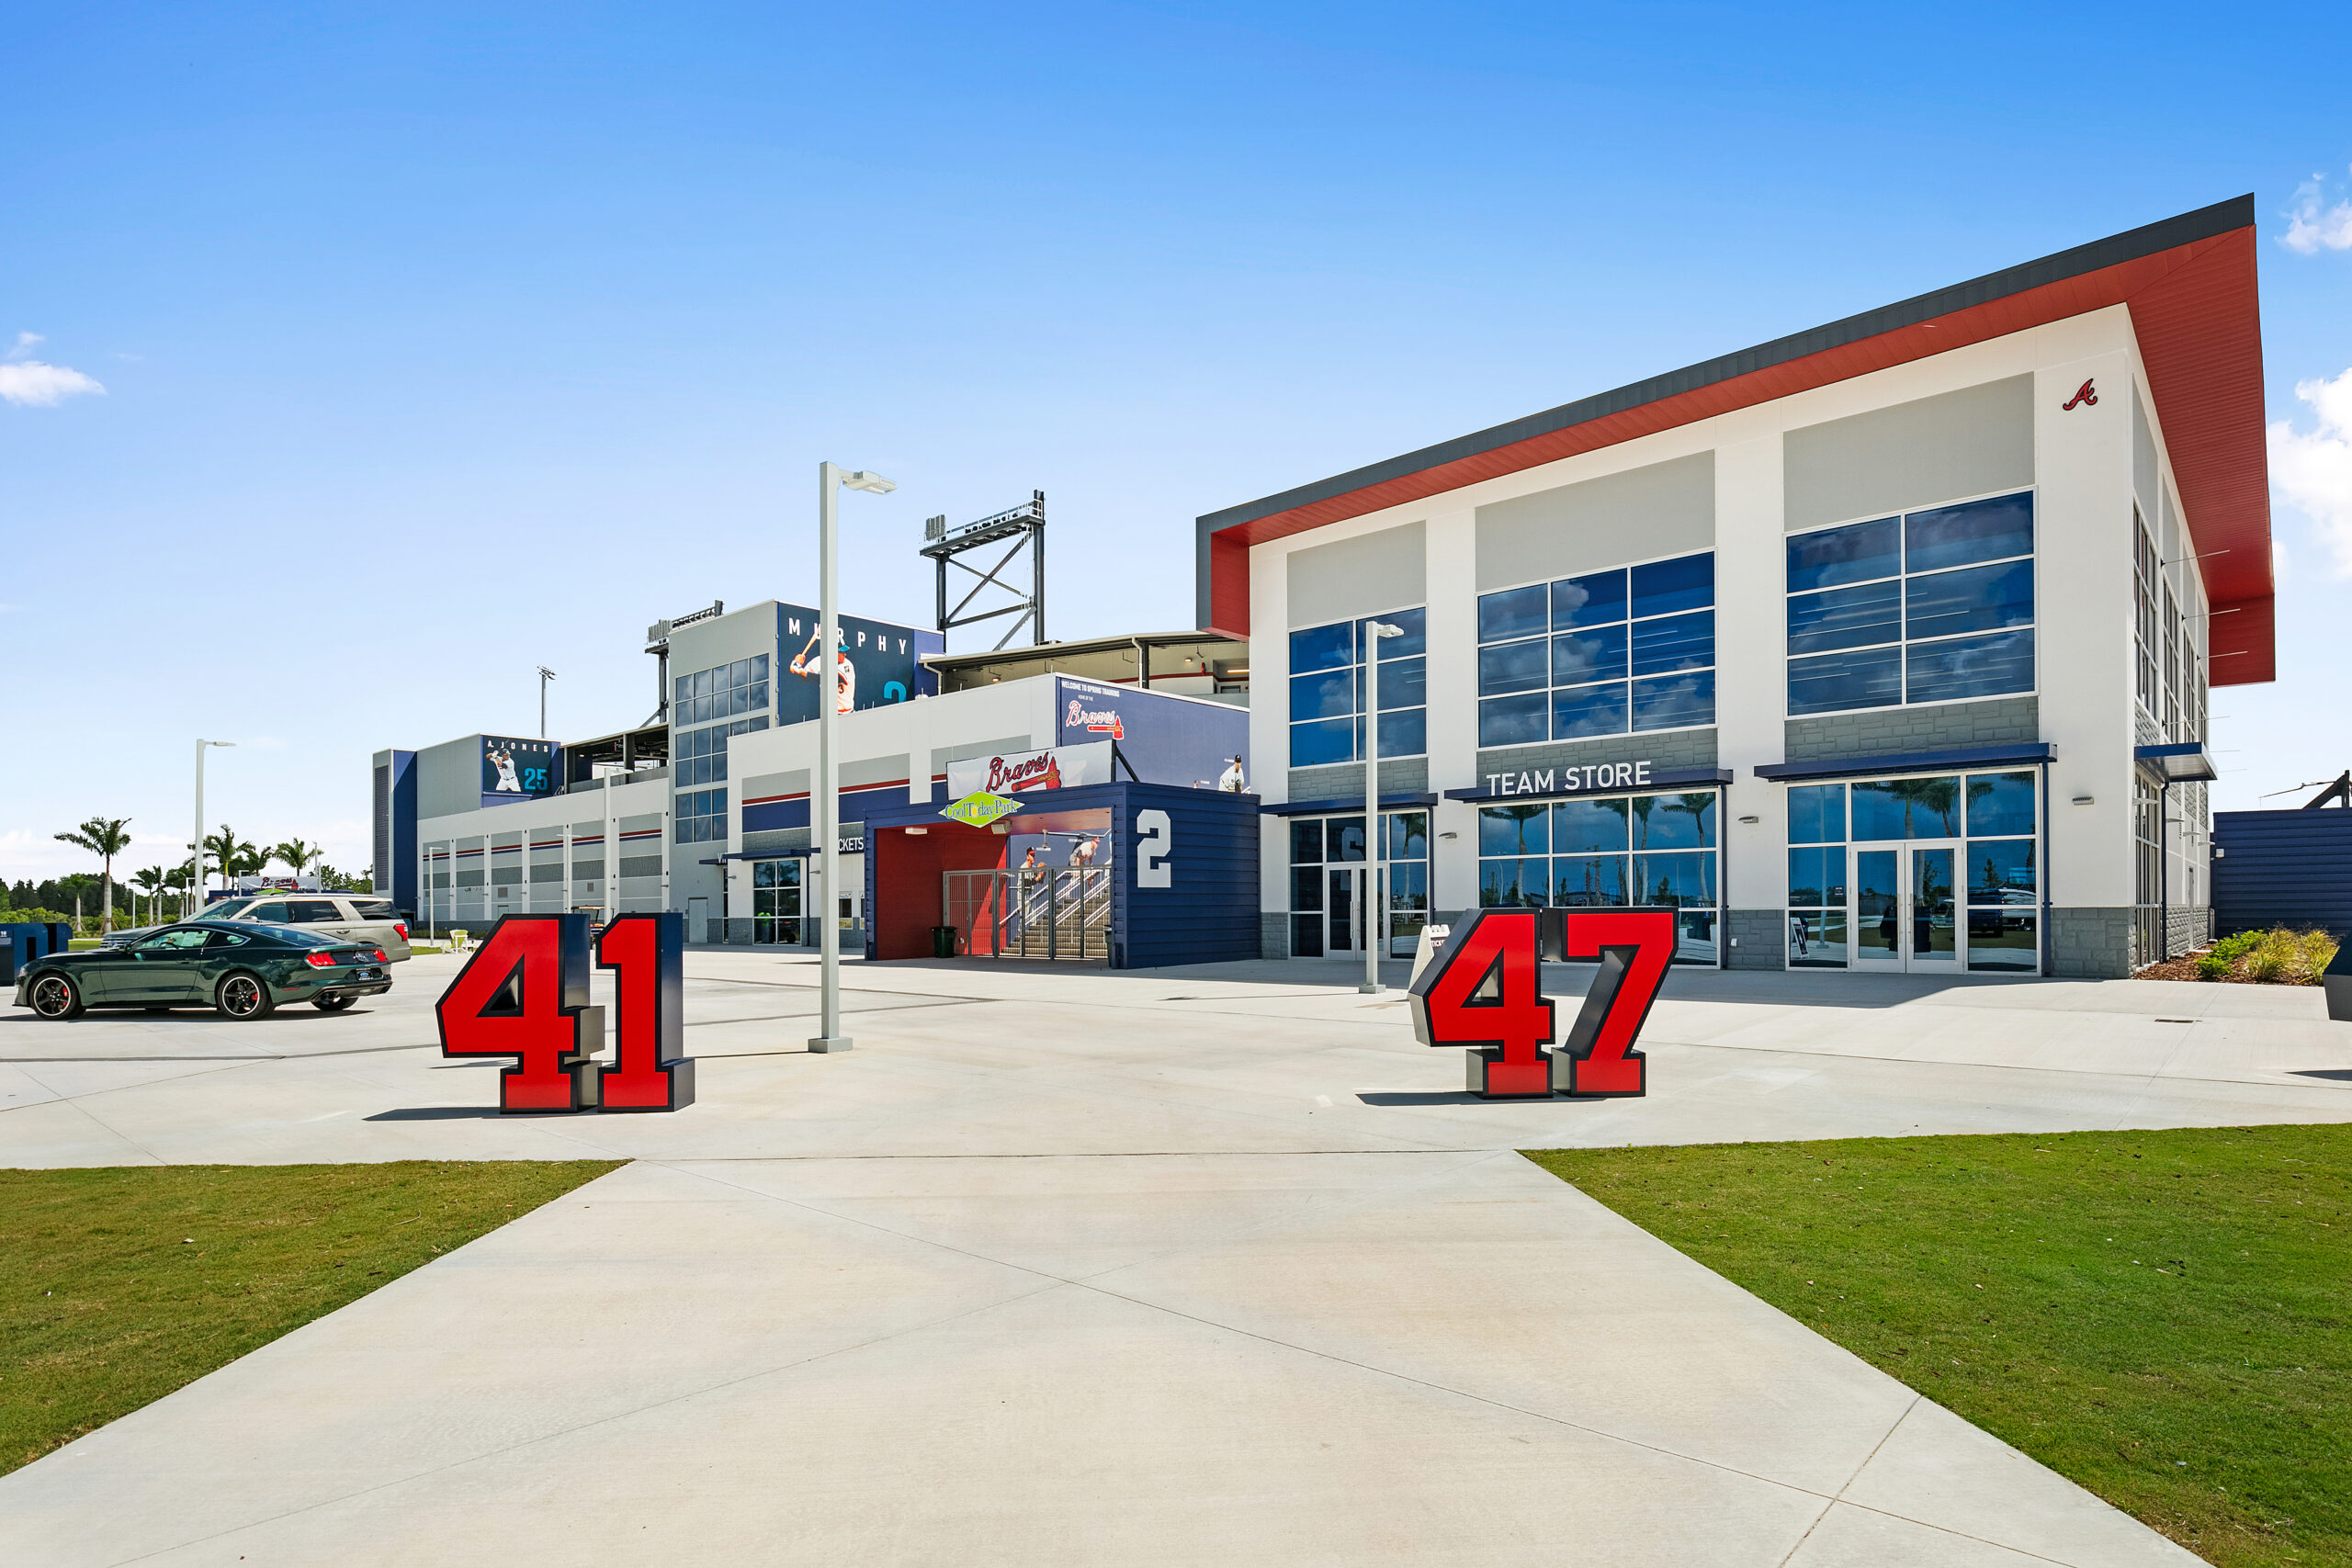 CoolToday Park - The Atlanta Braves Clubhouse Team Store is reopening  TOMORROW Monday, June 8th at 11AM! Come on by to pick up your Braves gear  and stop by the Superior Pools